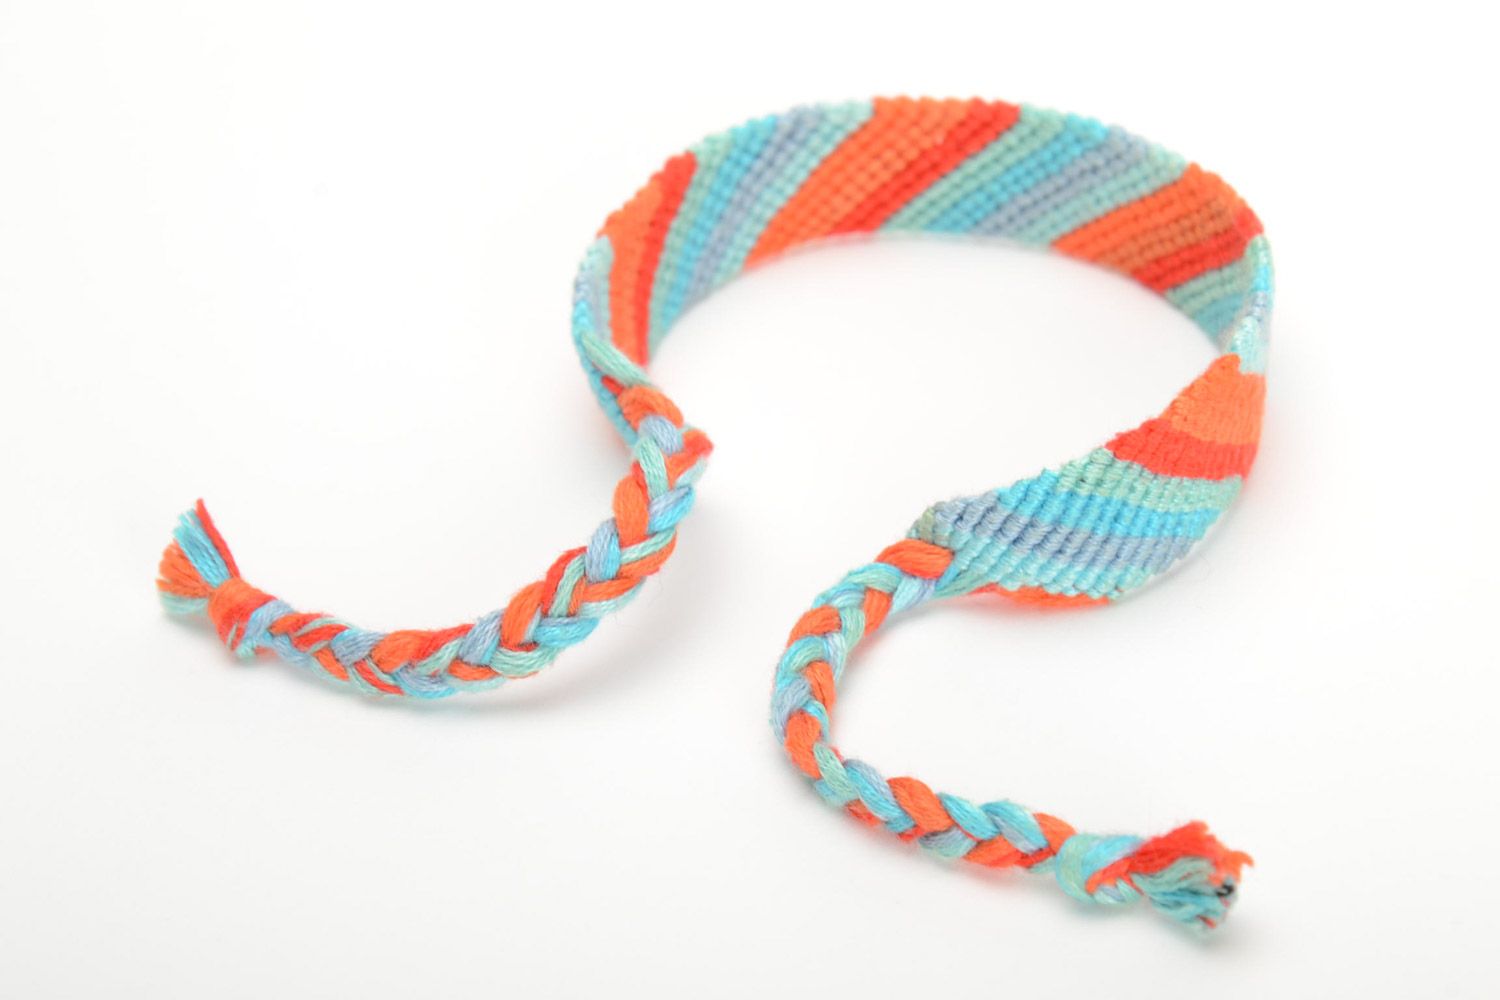 Handmade striped friendship bracelet woven of orange and blue embroidery floss photo 3